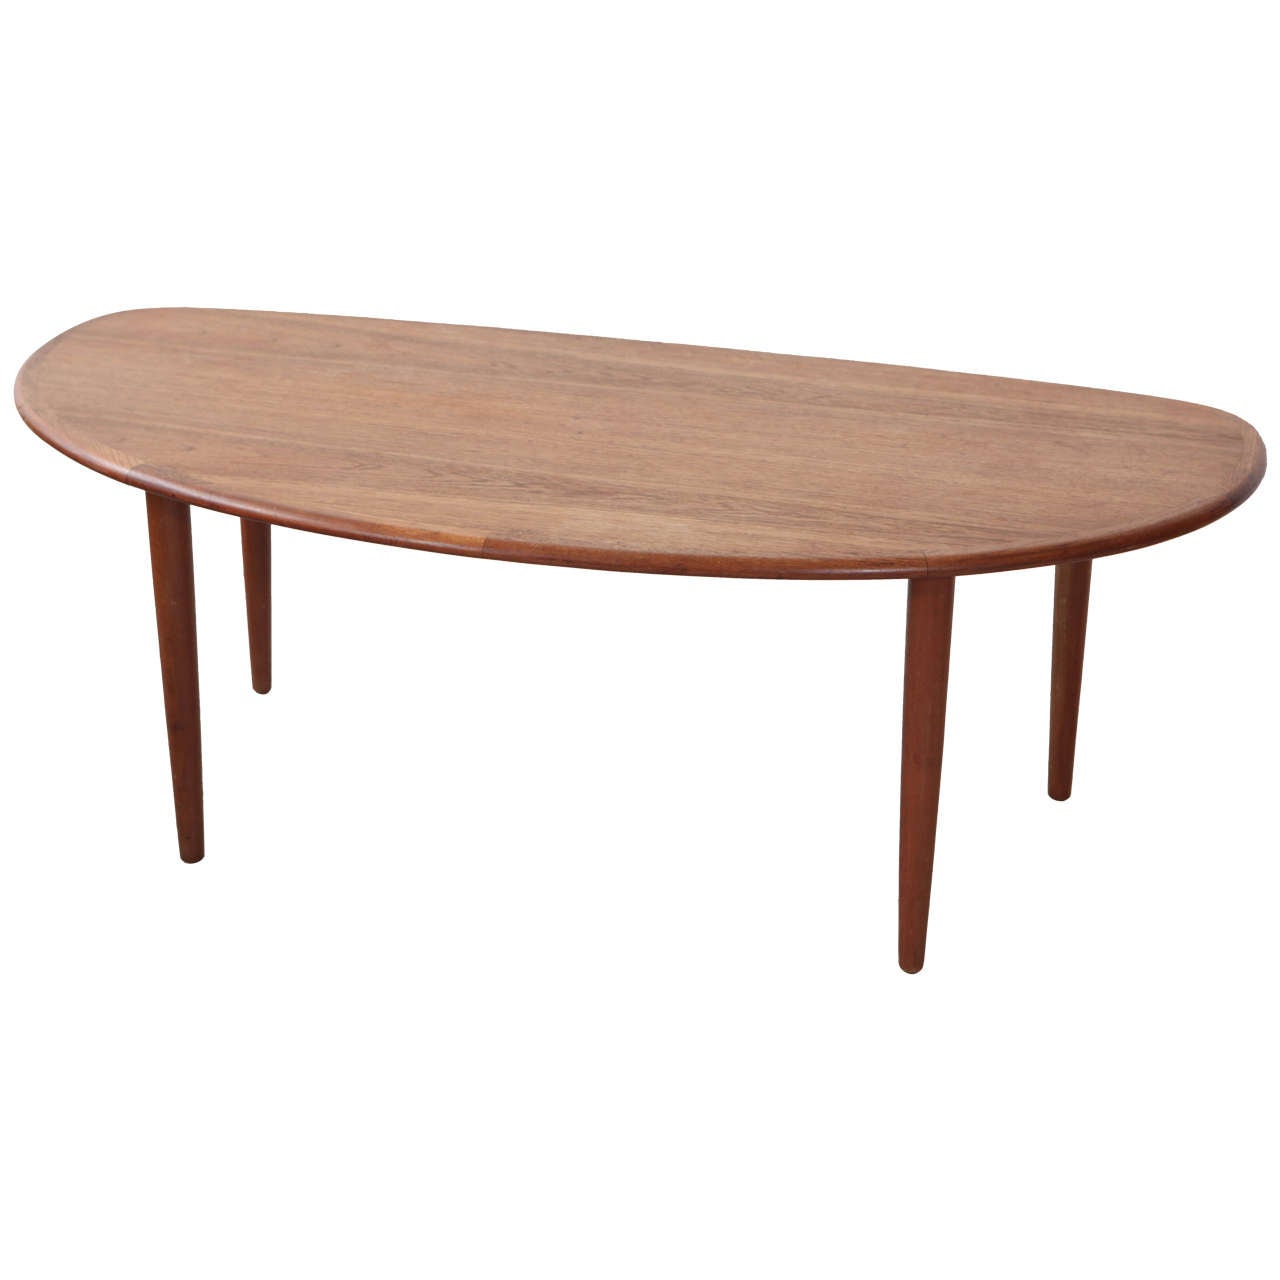 Tall Oblong Mid-Century Modern Coffee Table